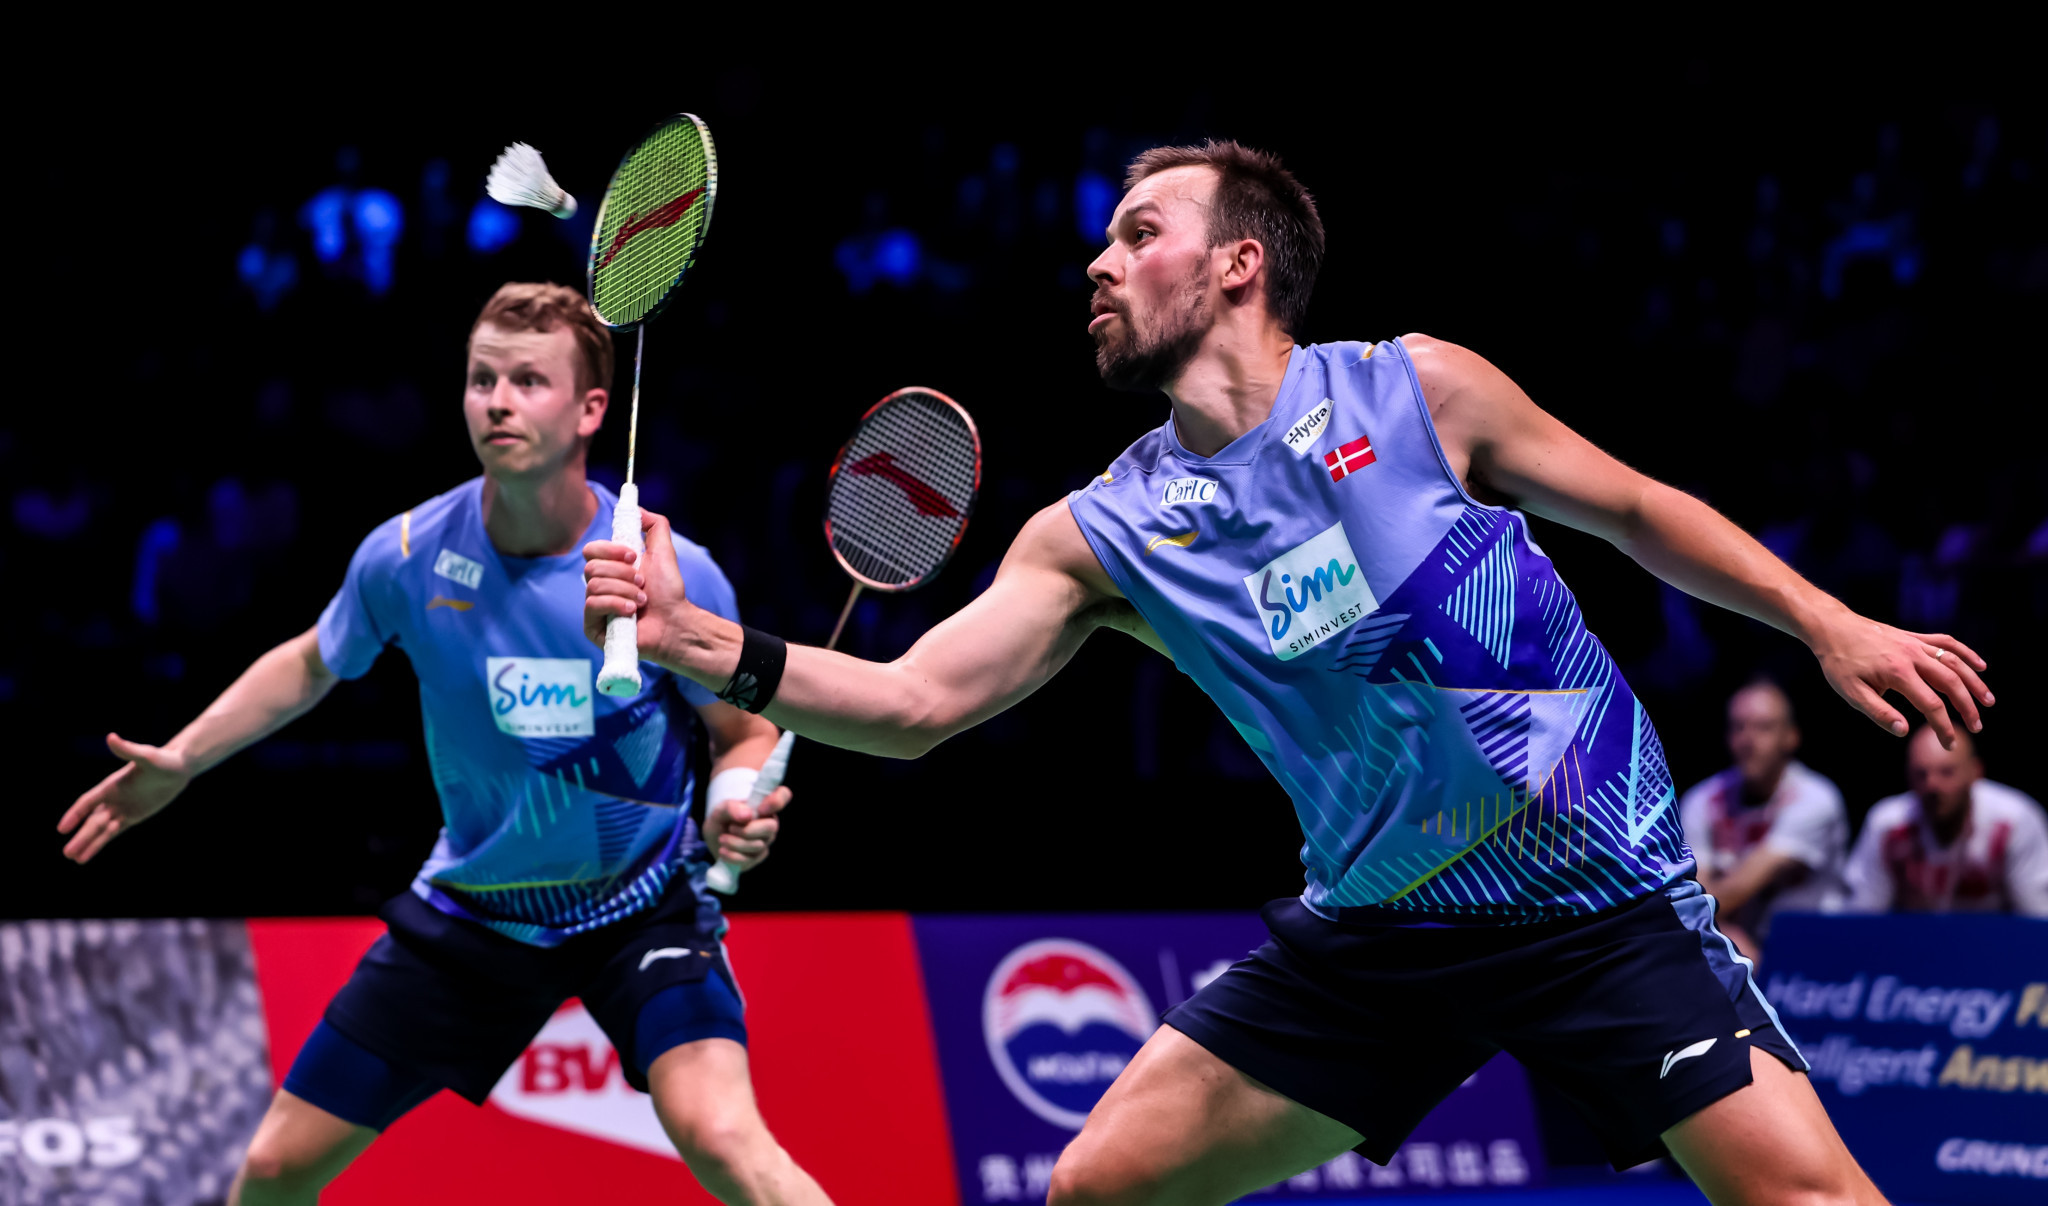 insidethegames is reporting LIVE from the BWF World Championships in Copenhagen